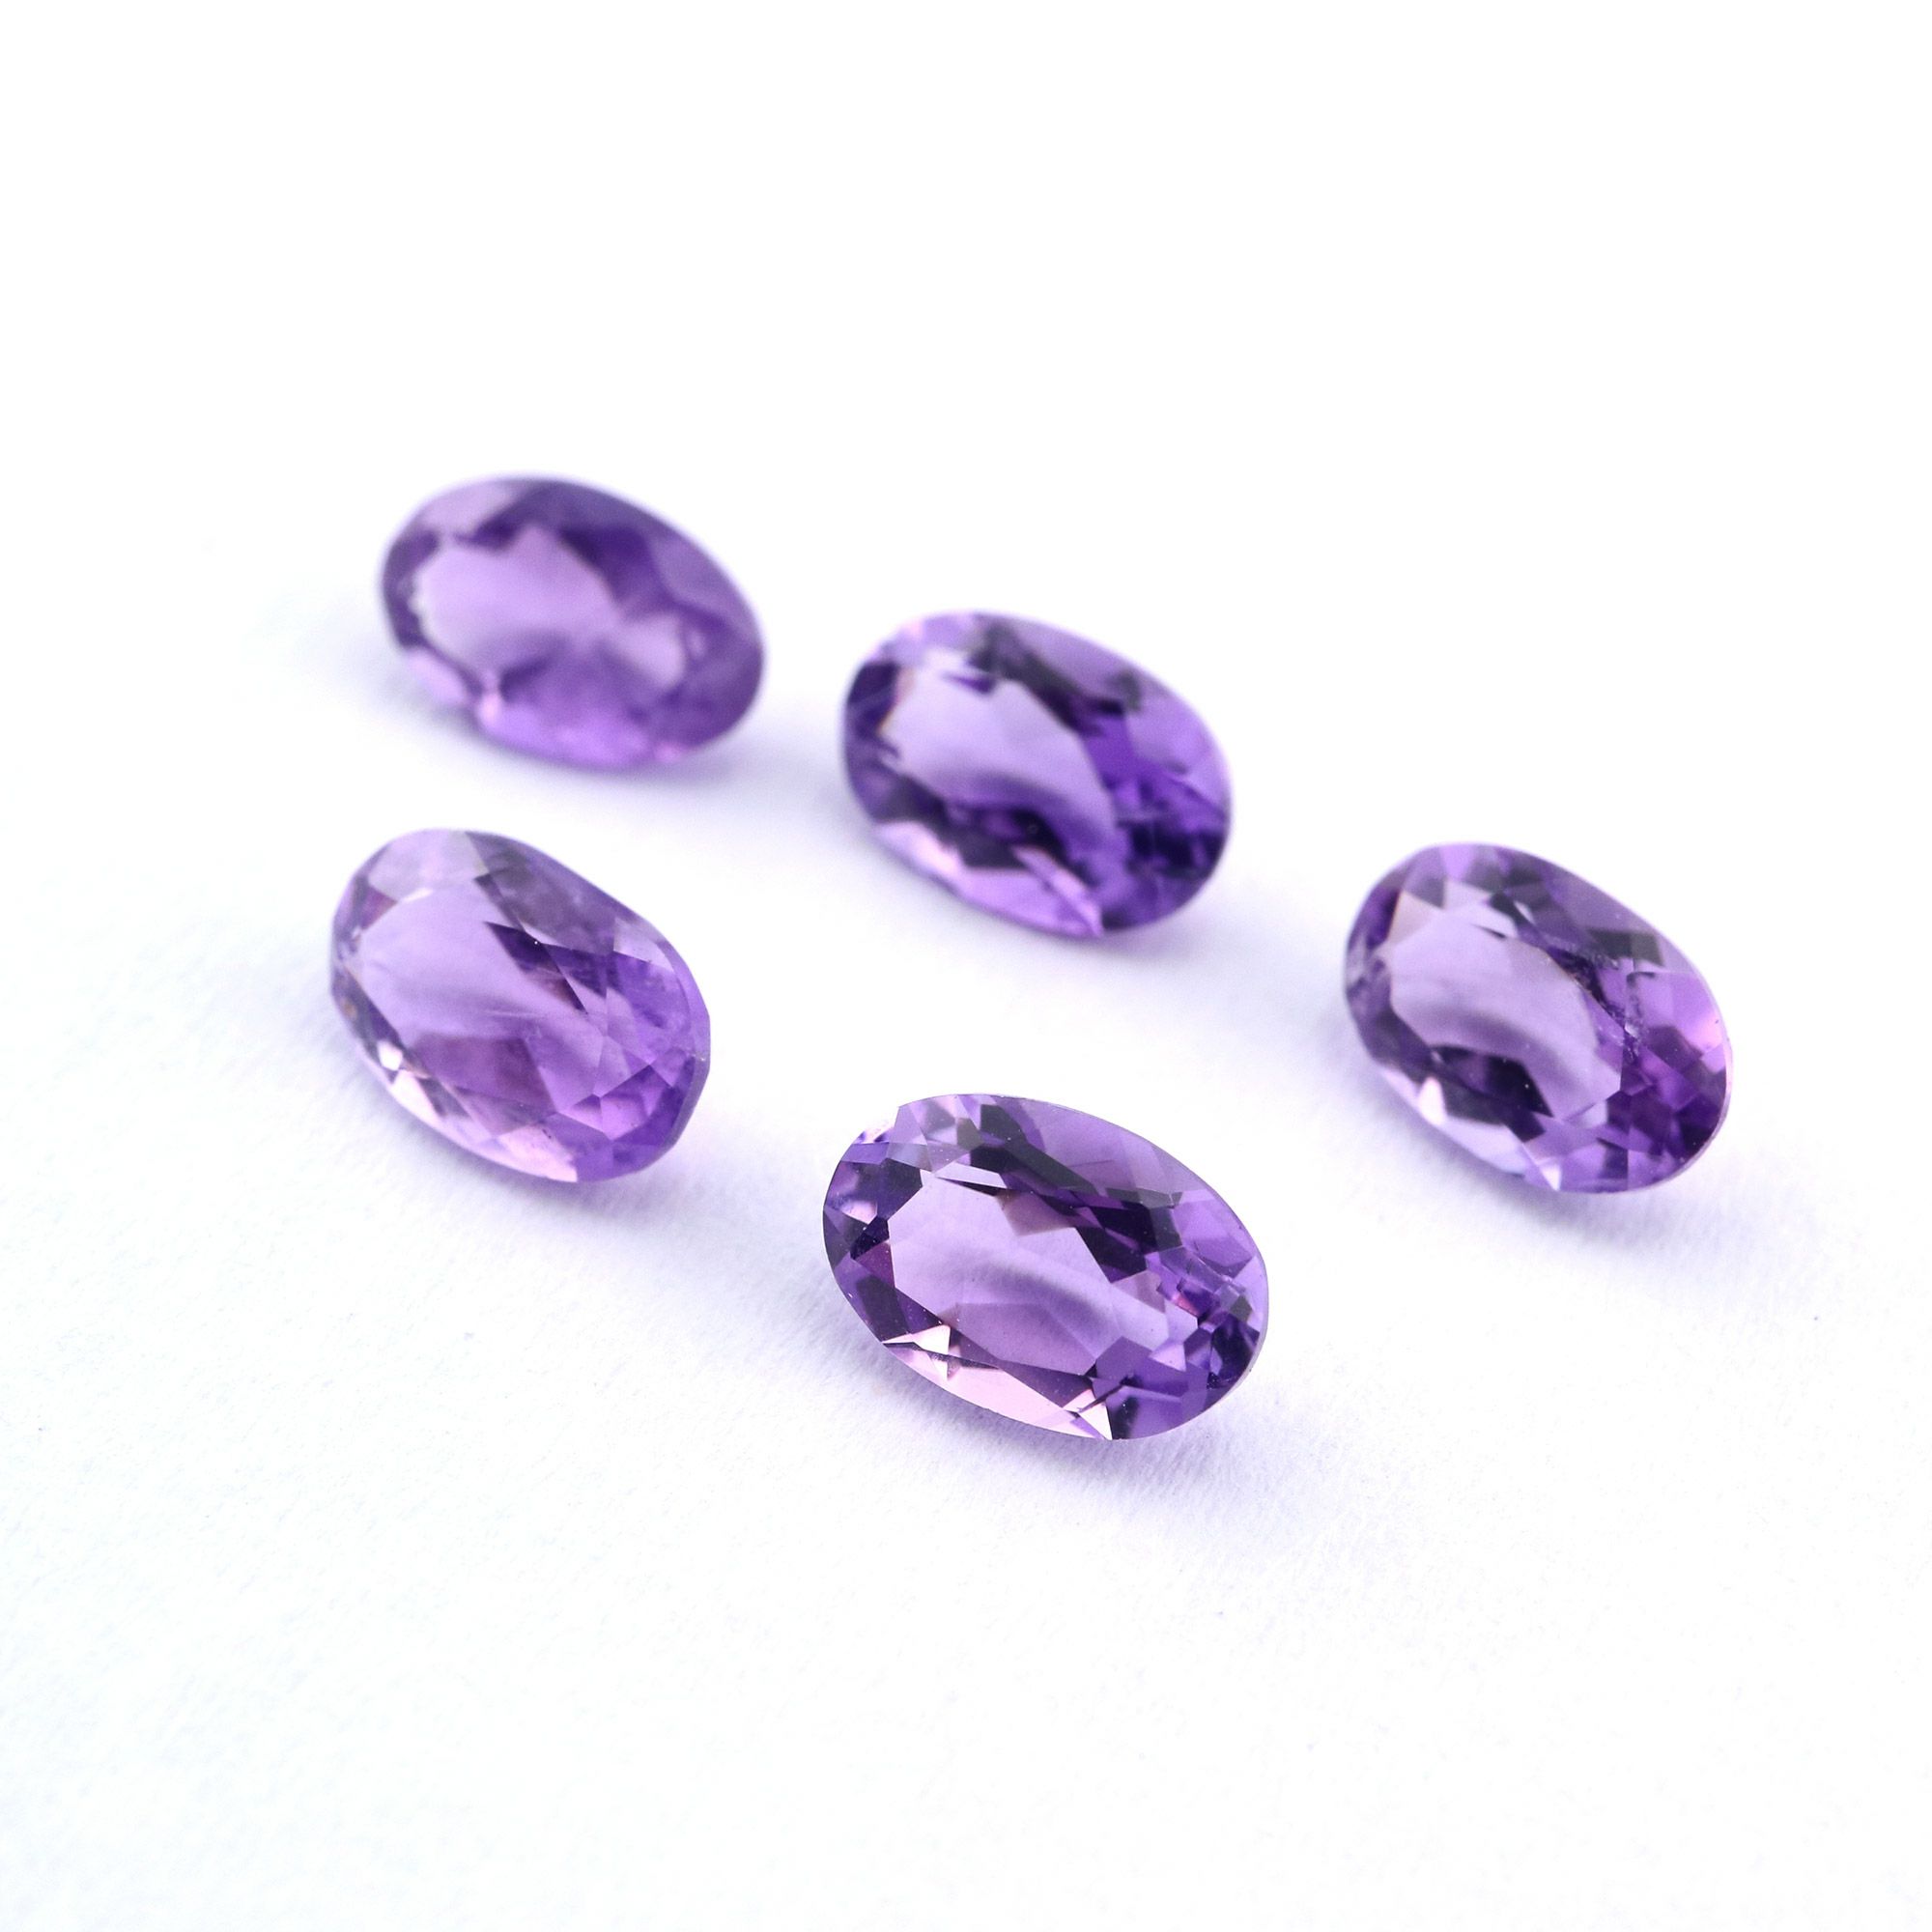 5Pcs Oval Purple Amethyst February Birthstone Faceted Cut Loose Gemstone Natural Semi Precious Stone DIY Jewelry Supplies 4120123 - Click Image to Close